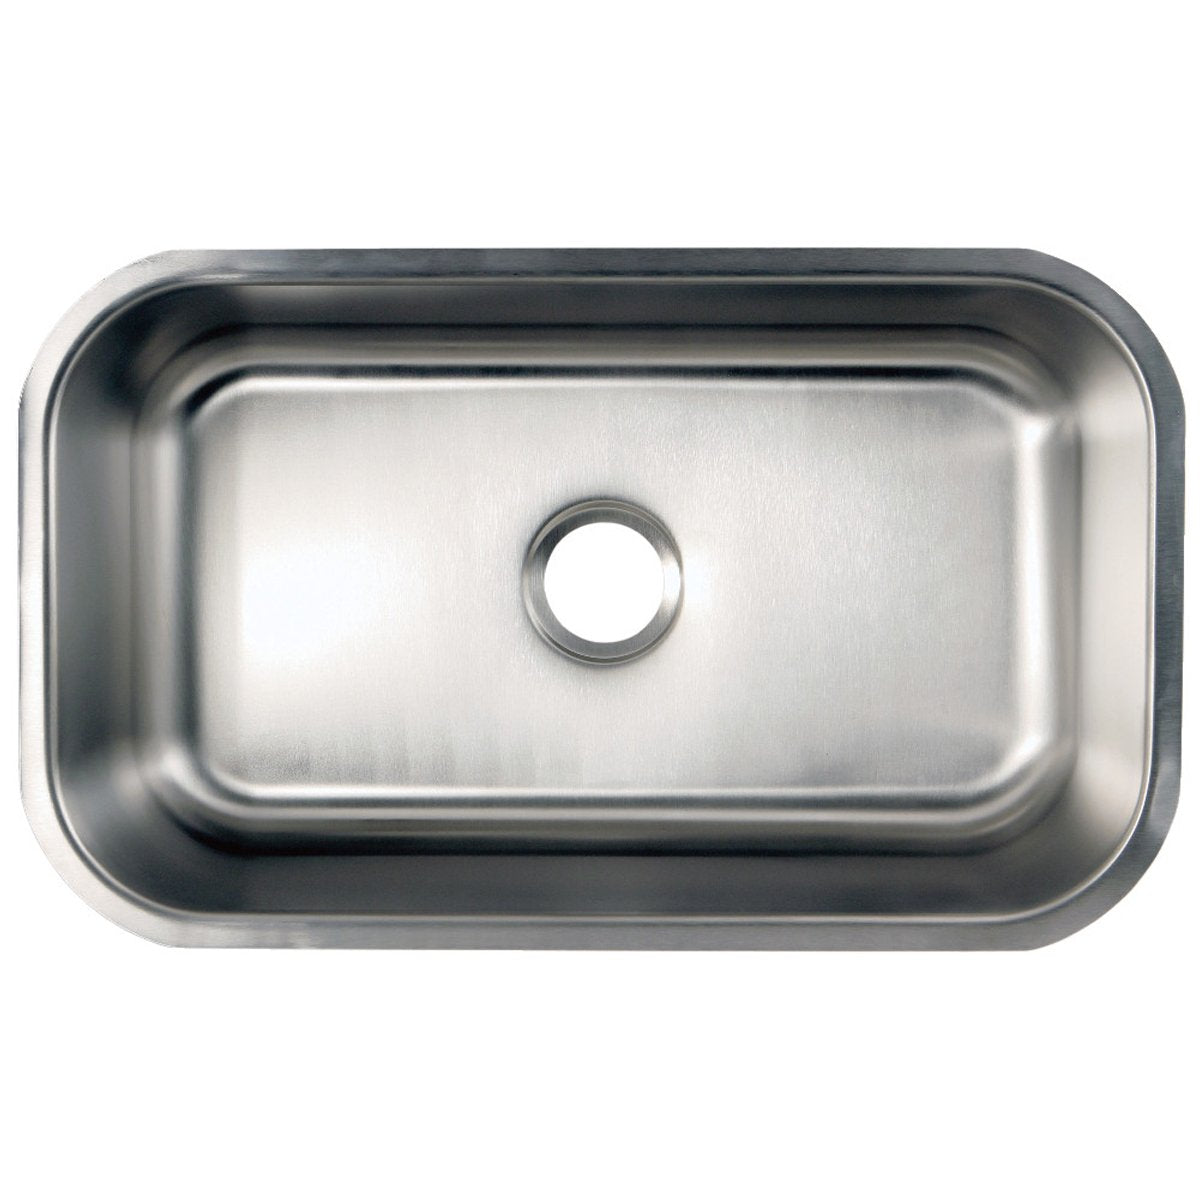 Kingston Brass Undermount Stainless Steel 30" Single Bowl Kitchen Sink Combo with Strainer